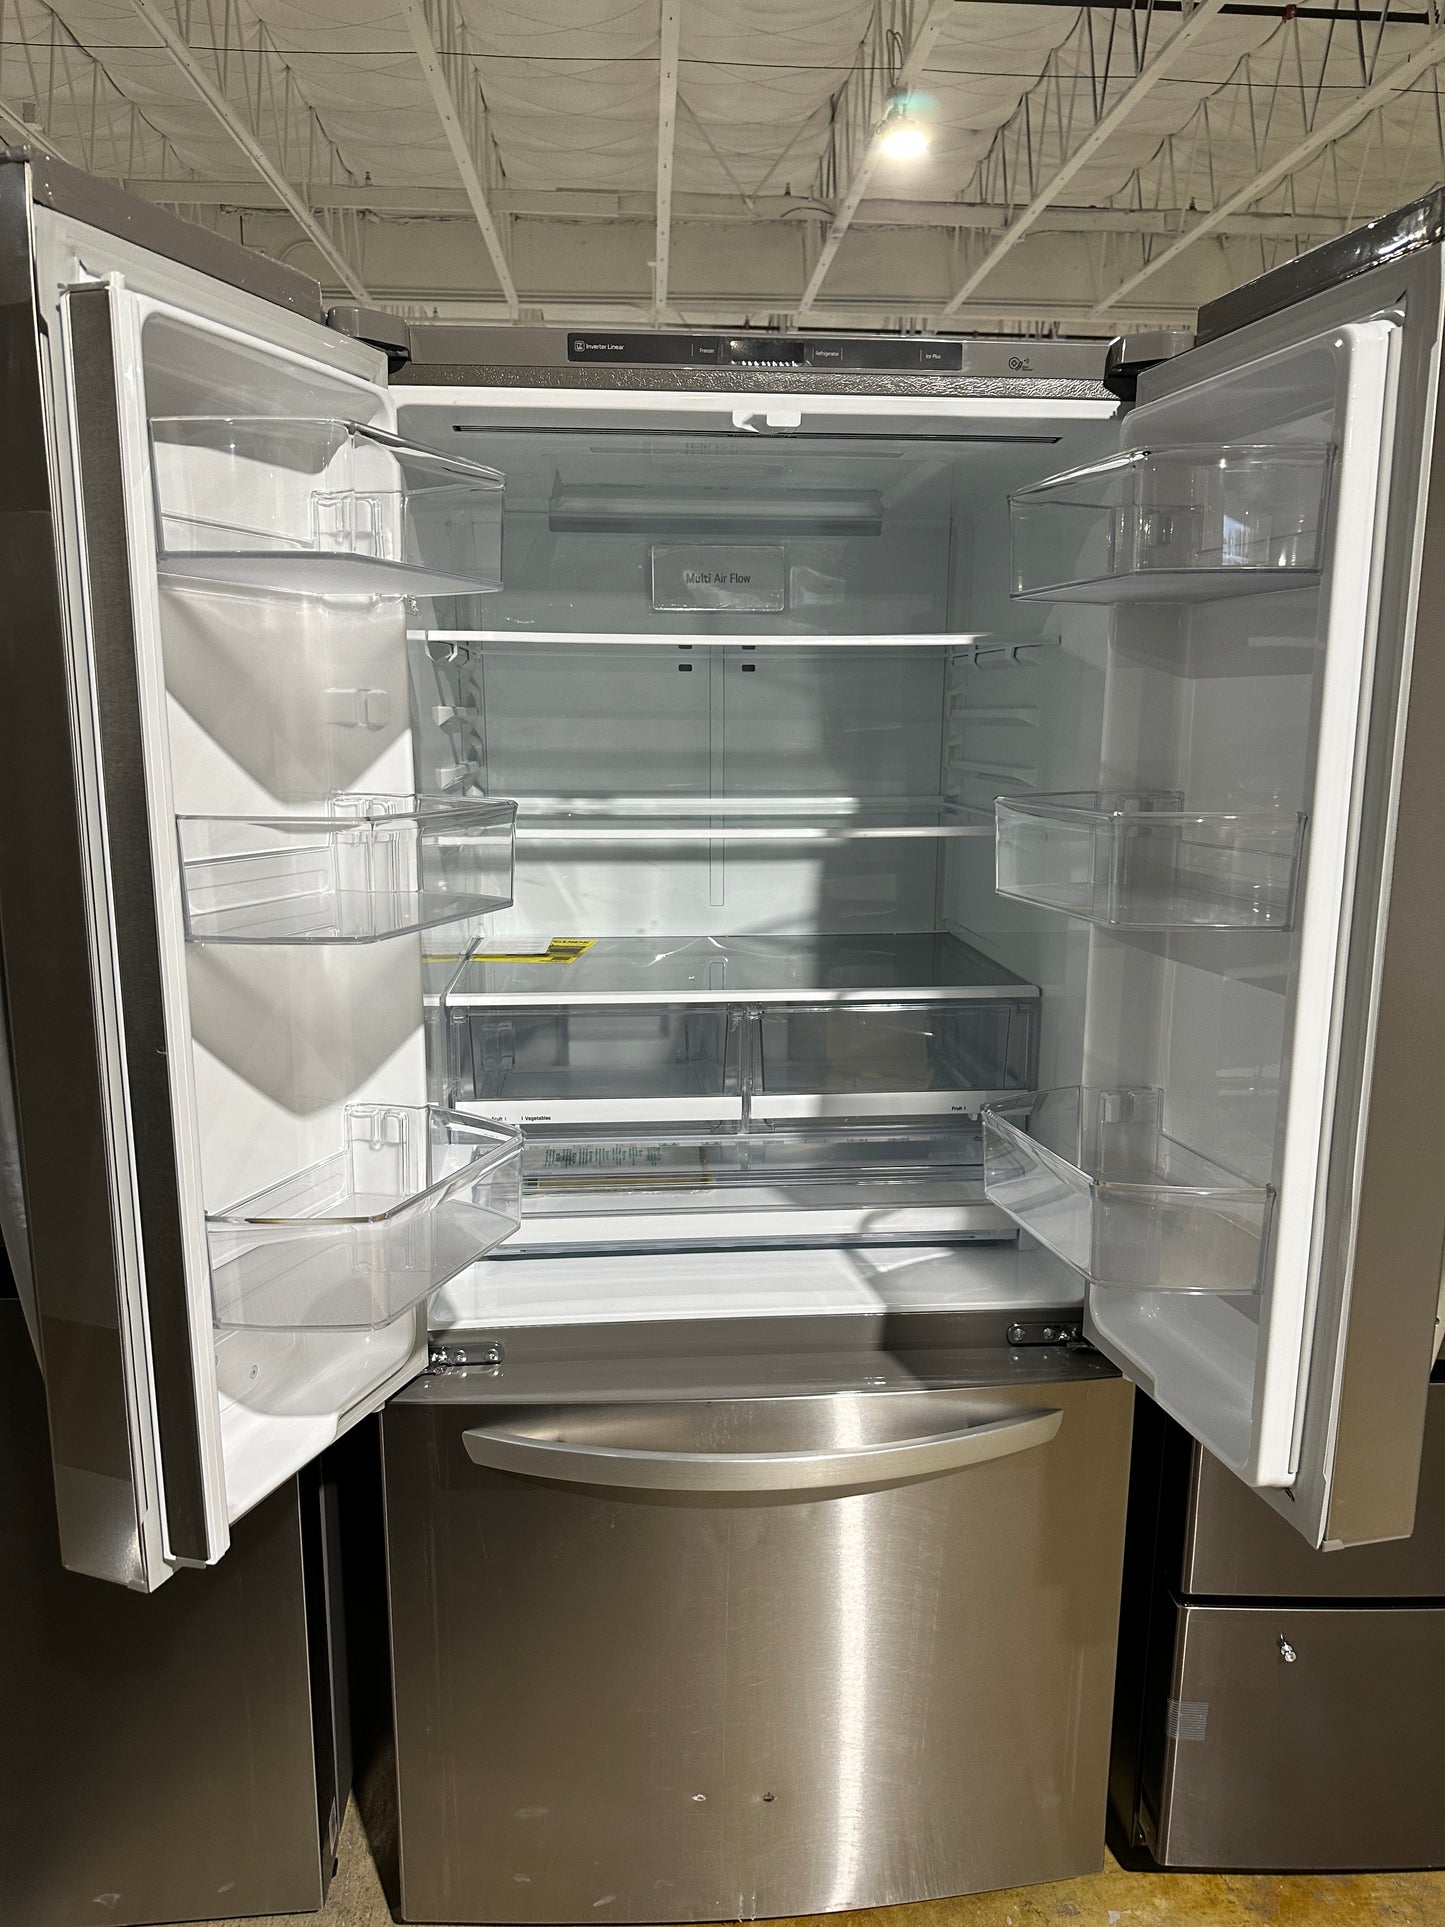 STAINLESS STEEL LG FRENCH DOOR REFRIGERATOR MODEL: LRFCS25D3S  REF12345S